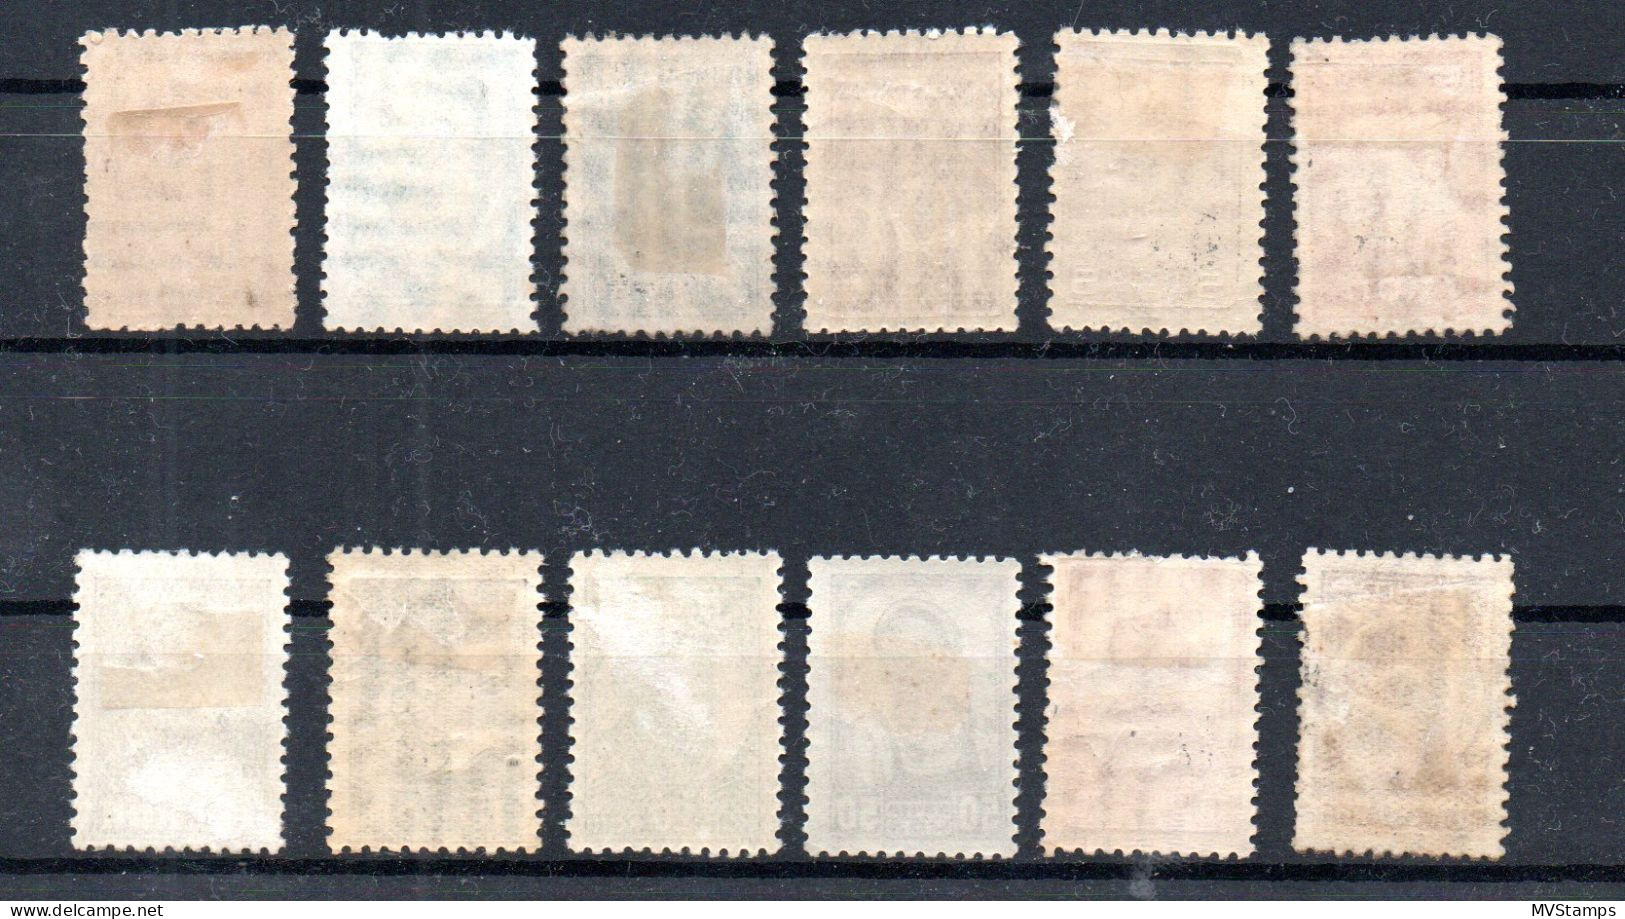 Russia 1929 Old Set Definitive Stamps (Michel 365/73+375/77) MLH - Unused Stamps